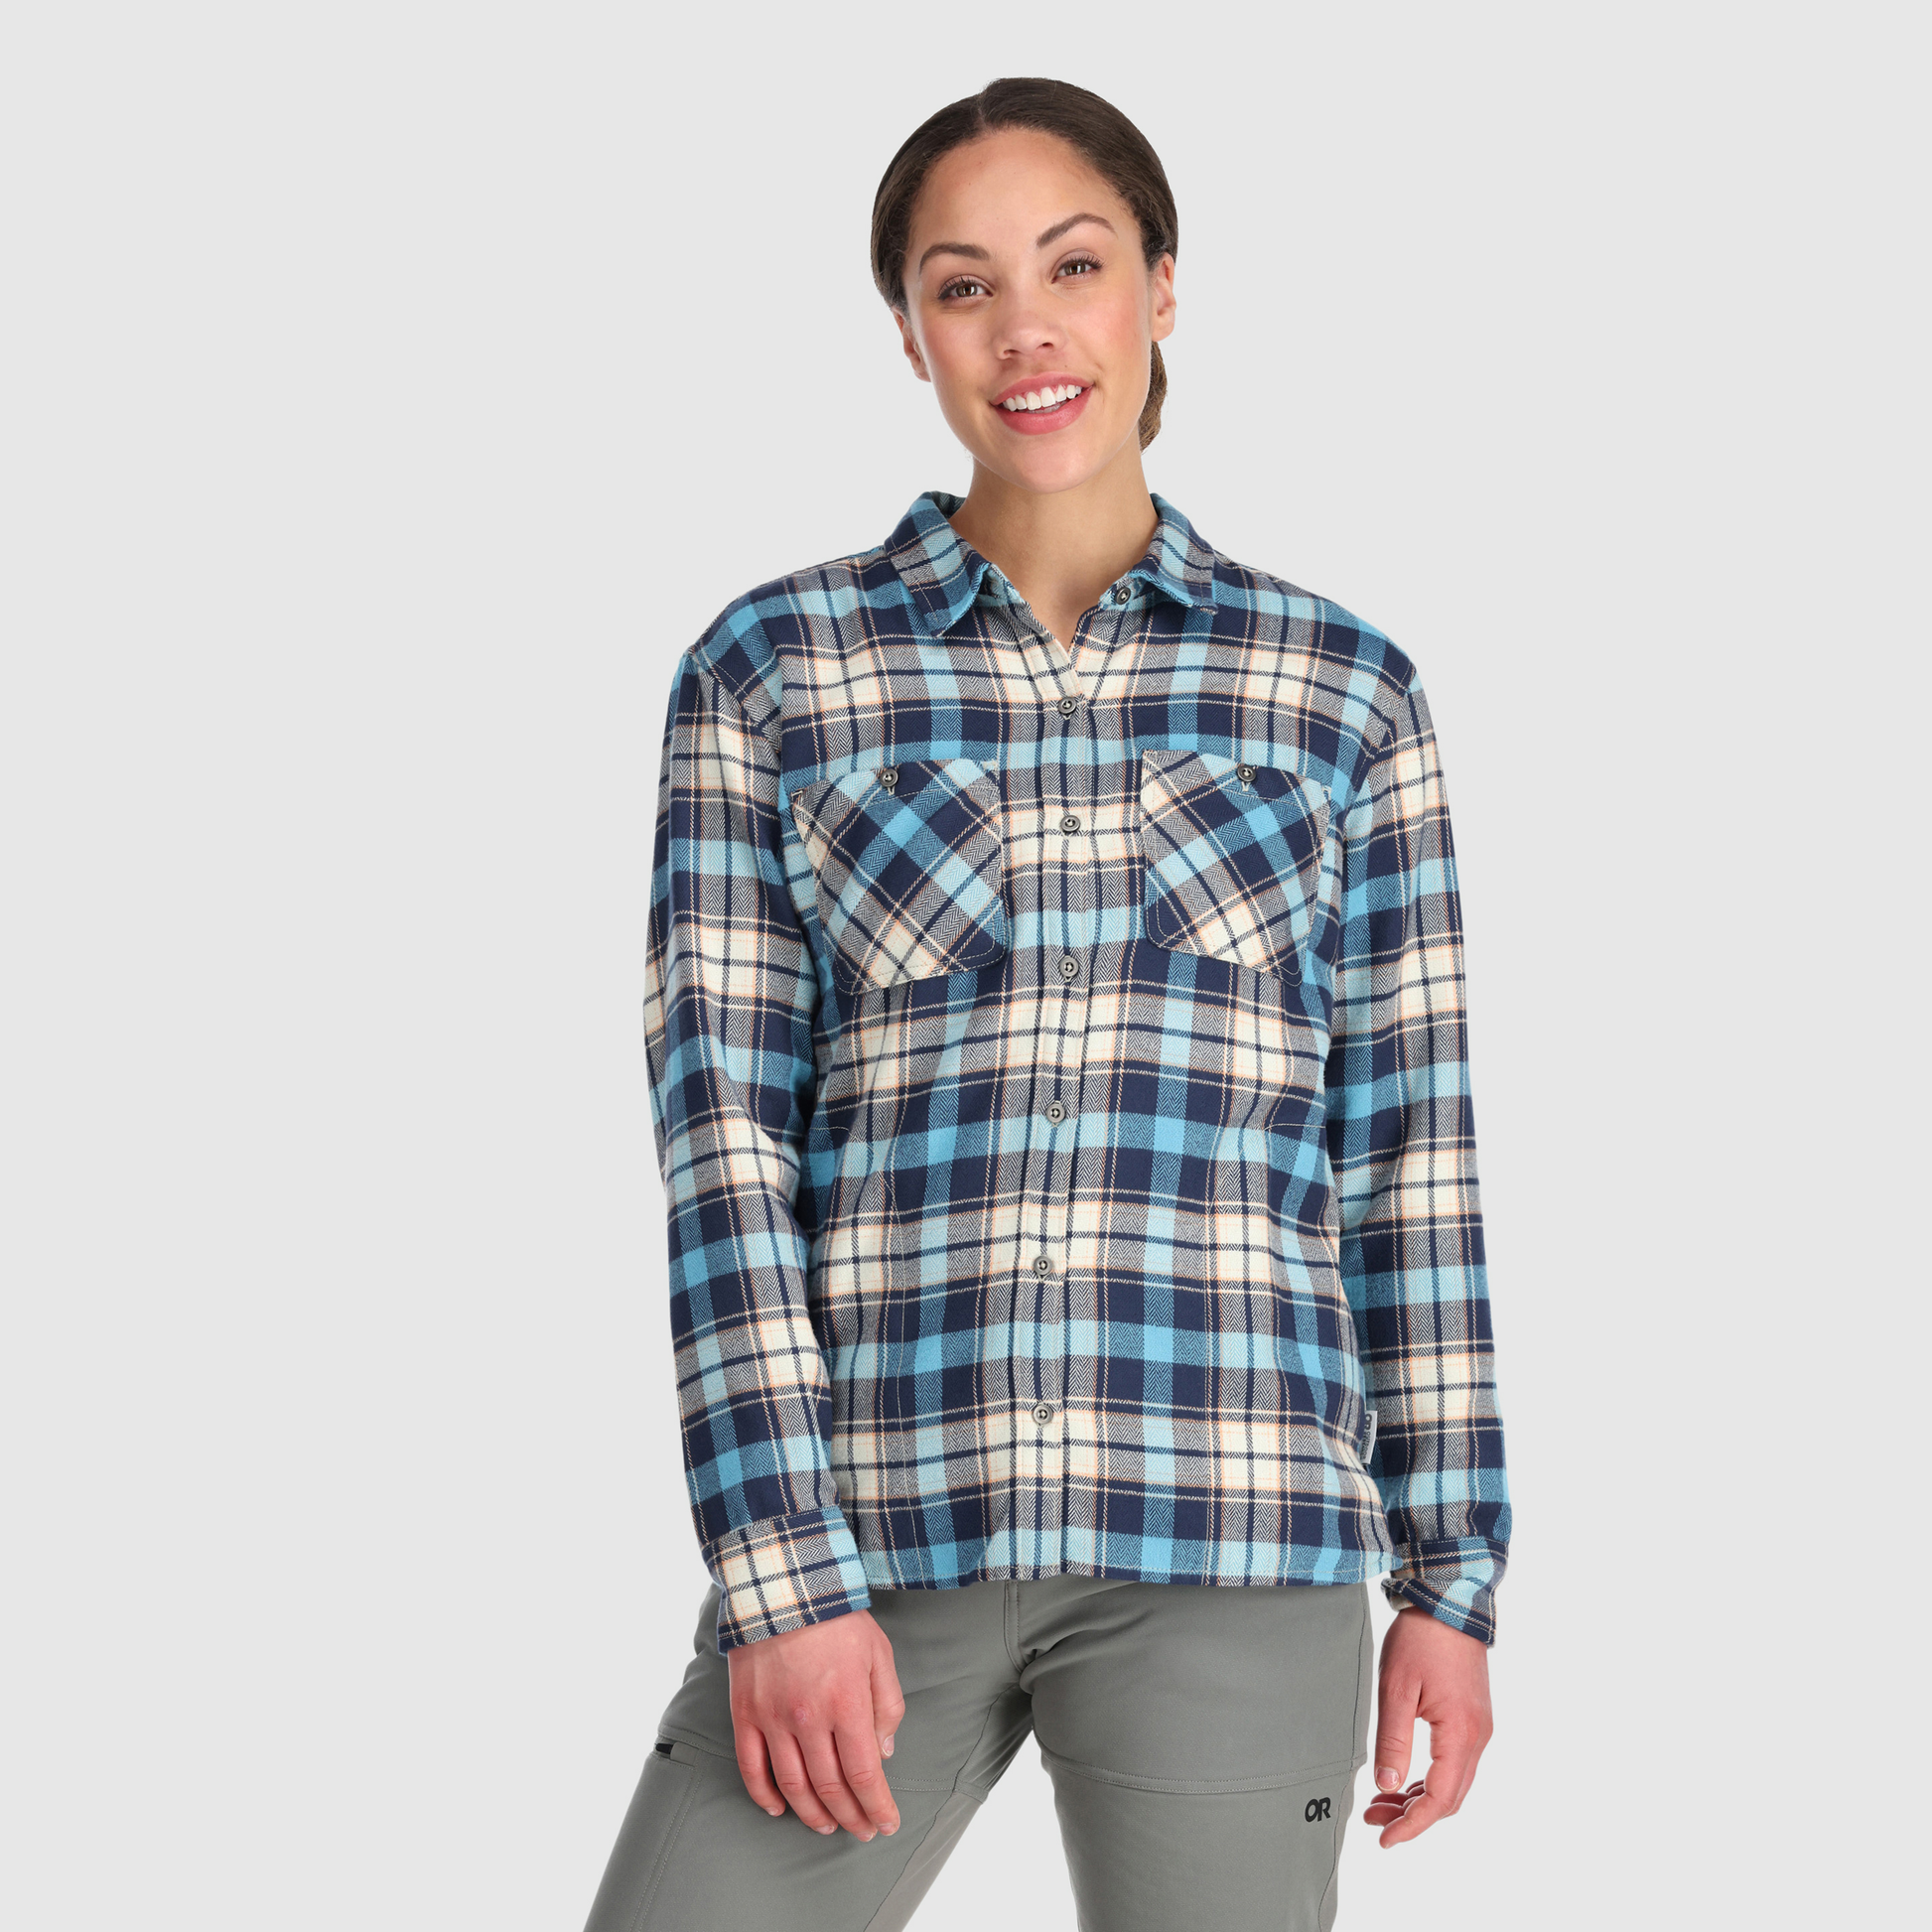 How to Style Flannel Plaid Shirt